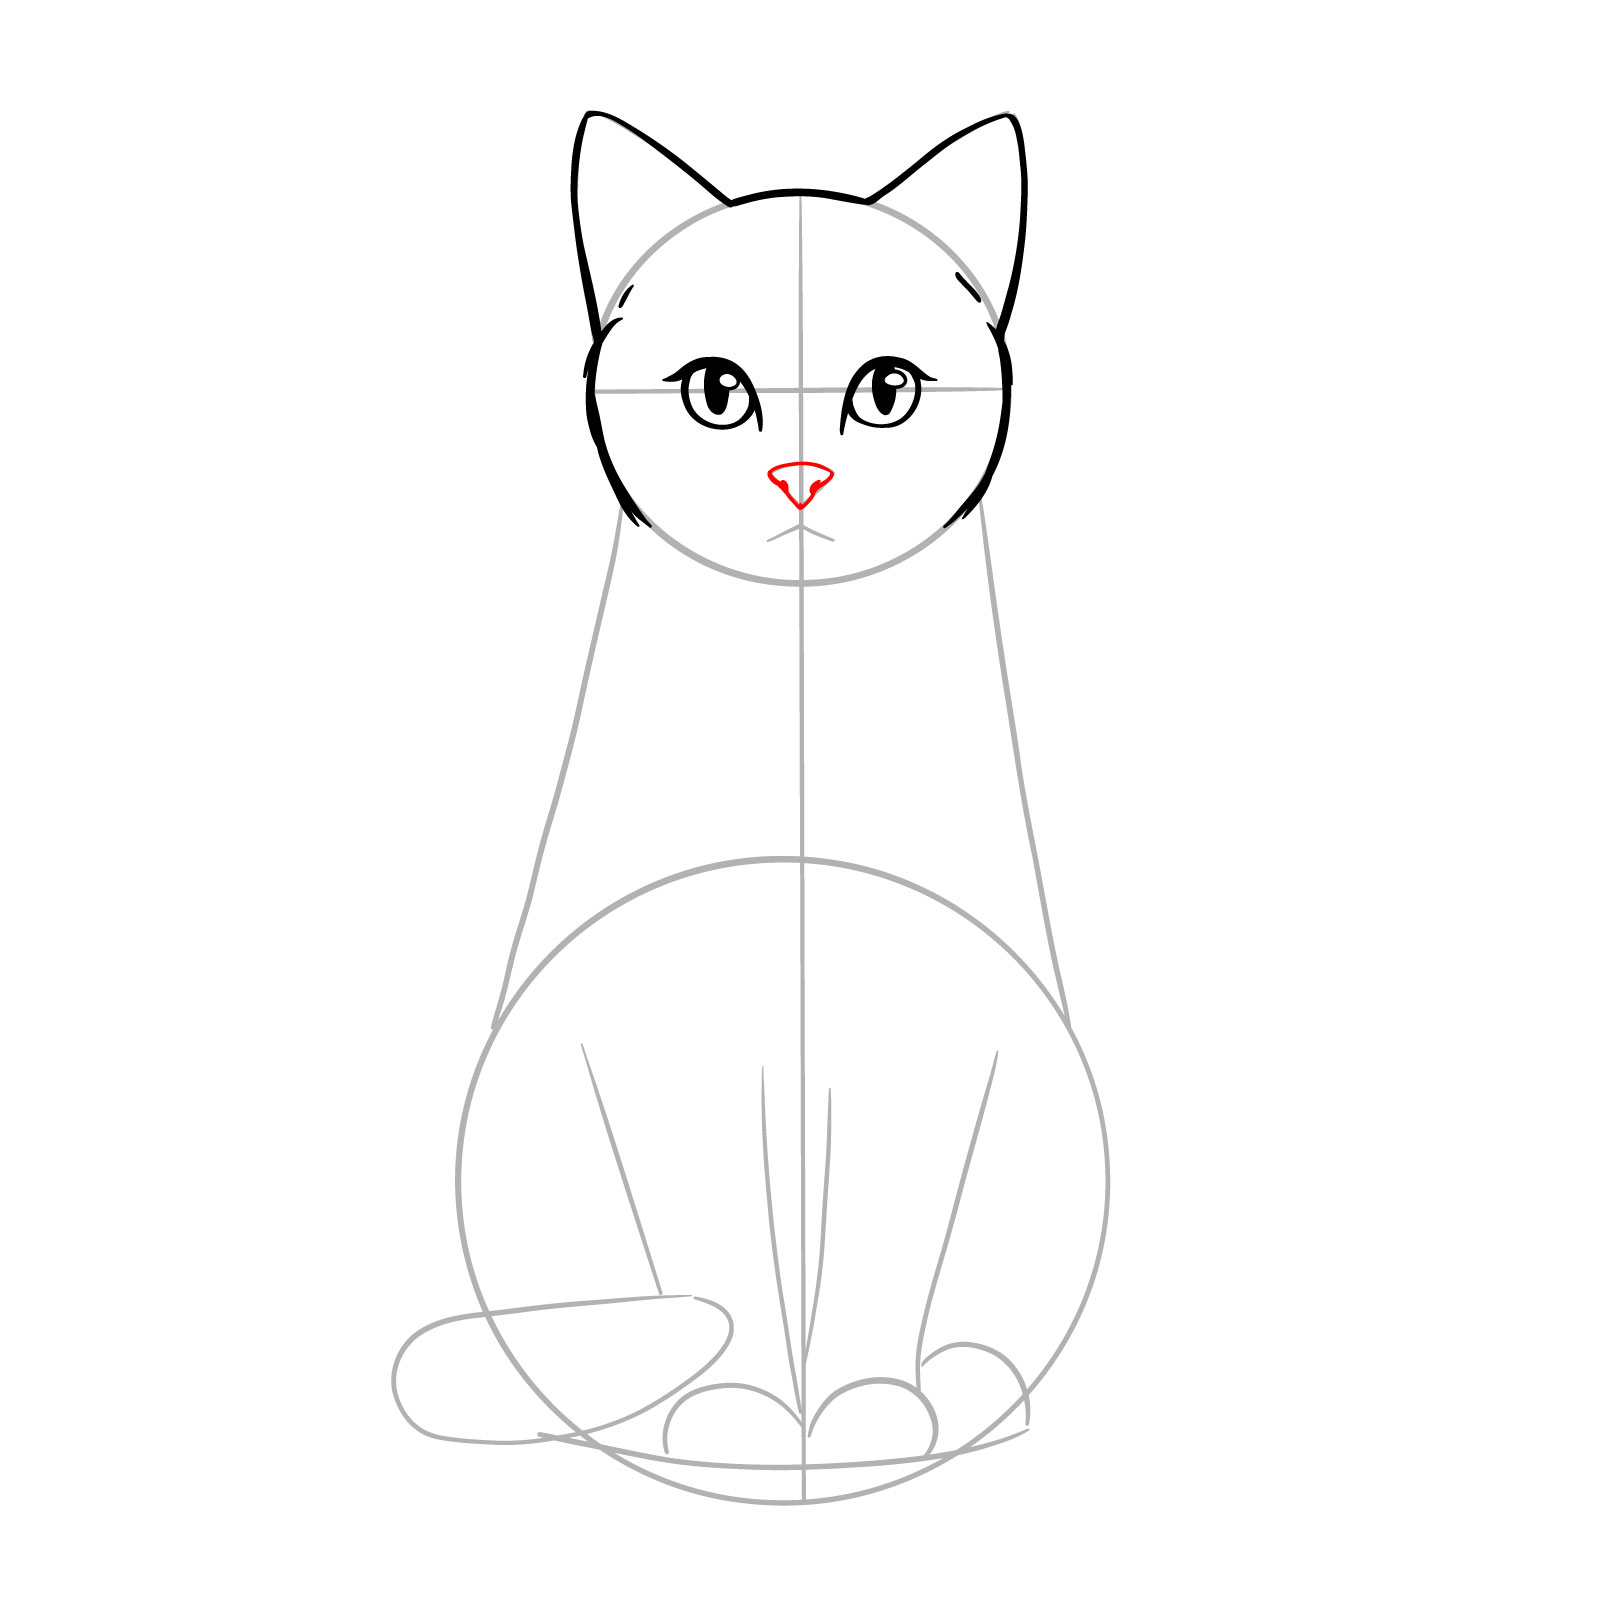 Sketch outlining a triangular nose shape on a sitting cat - step 07